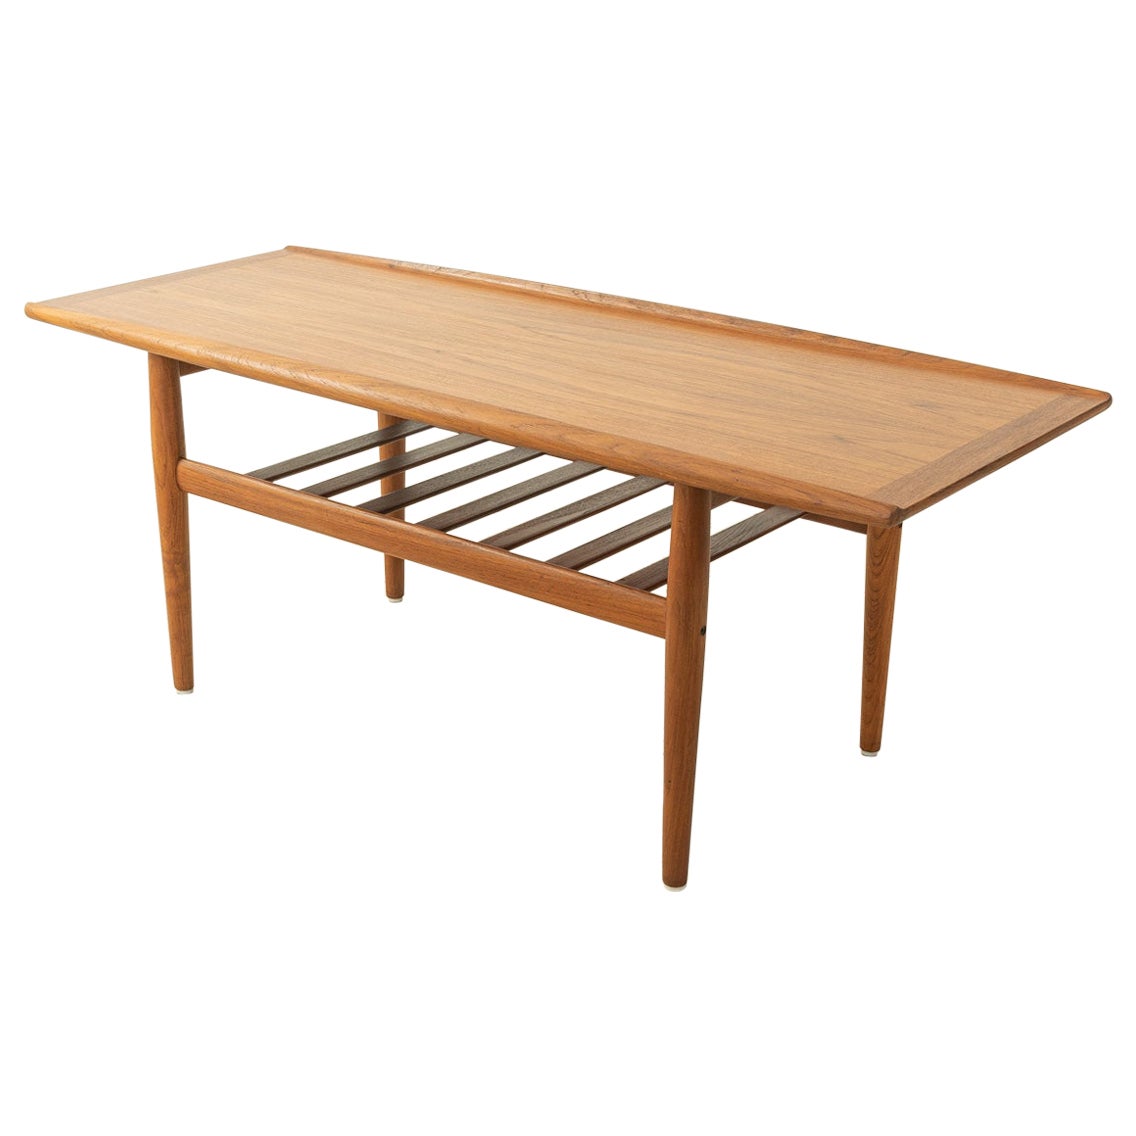 Grete Jalk Coffee Table Manufactured by Glostrup, 1960s, Made in Denmark